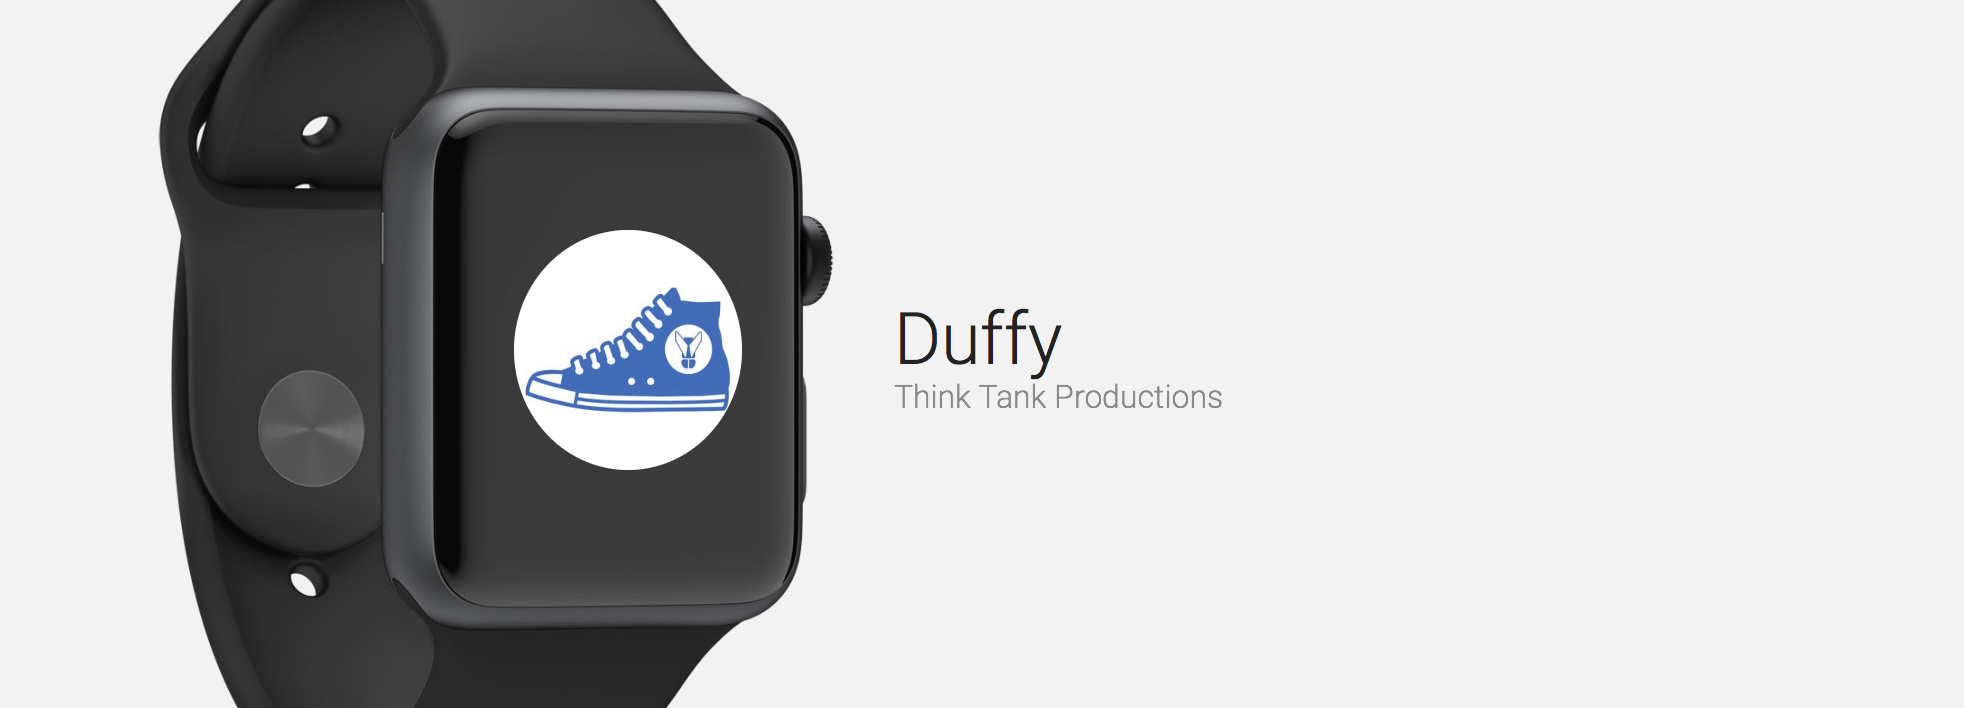 Duffy Is a Simple Pedometer App With a Good Complication